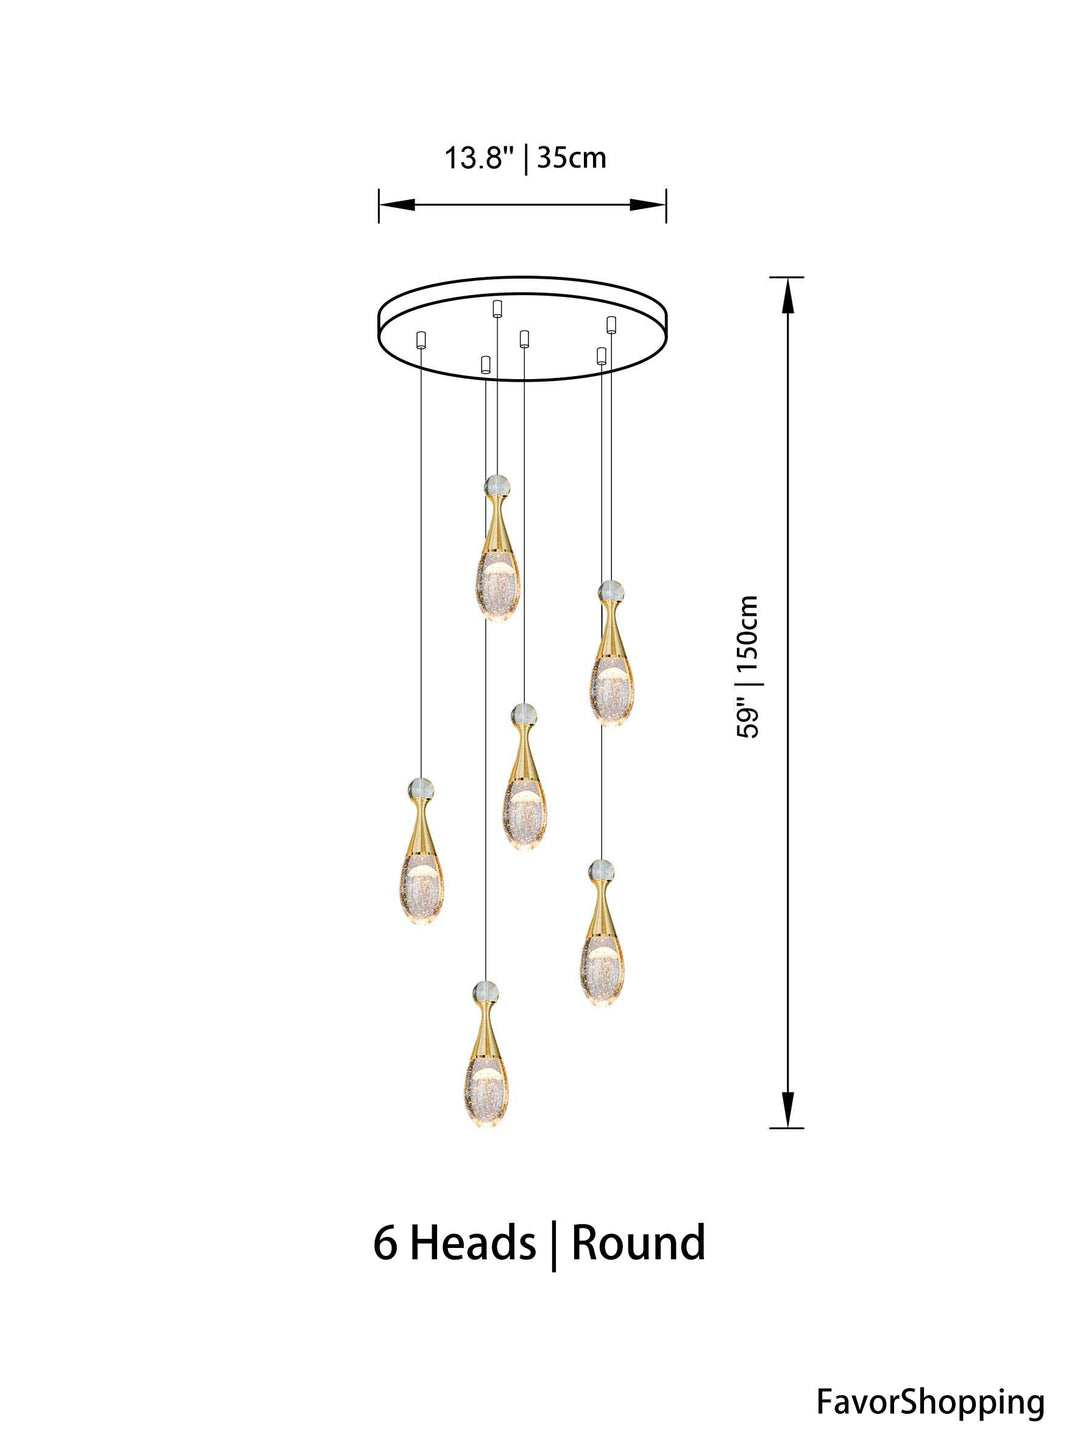 Raindrop Crown Jellyfish Crystal Chandelier for 2 Story Foyer and Hotel Lobby